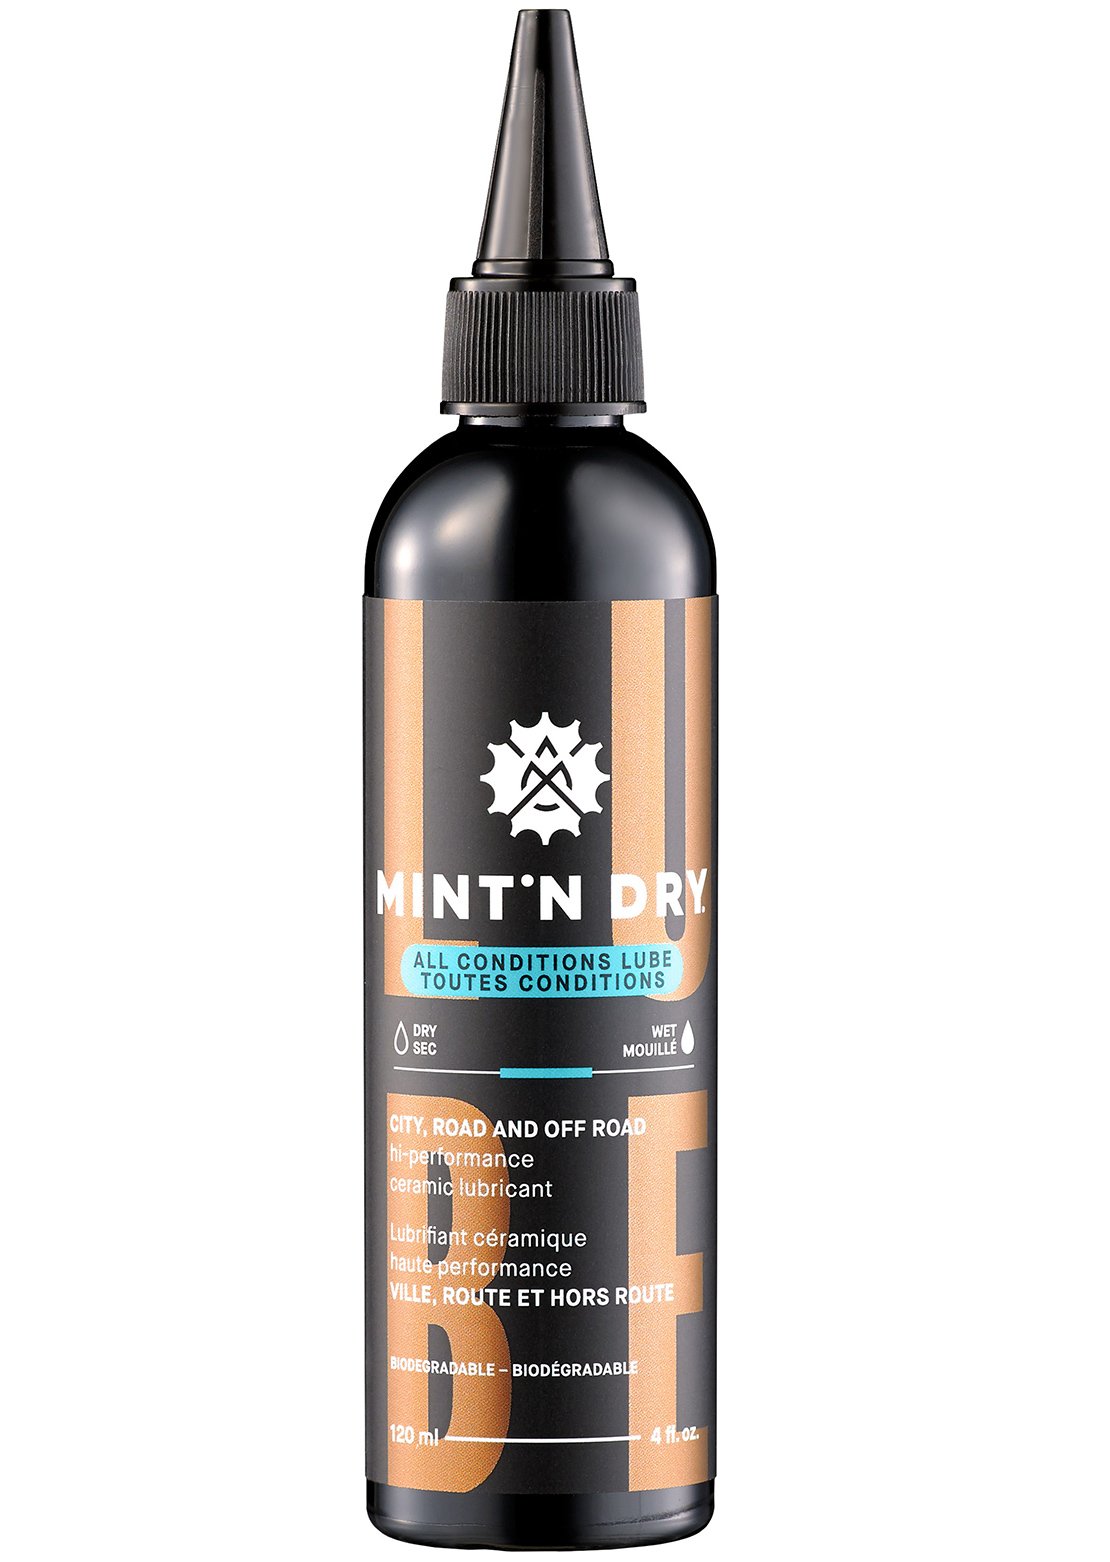 Mint&#39;N Dry Ceramic All Condition Lube Gift Pack